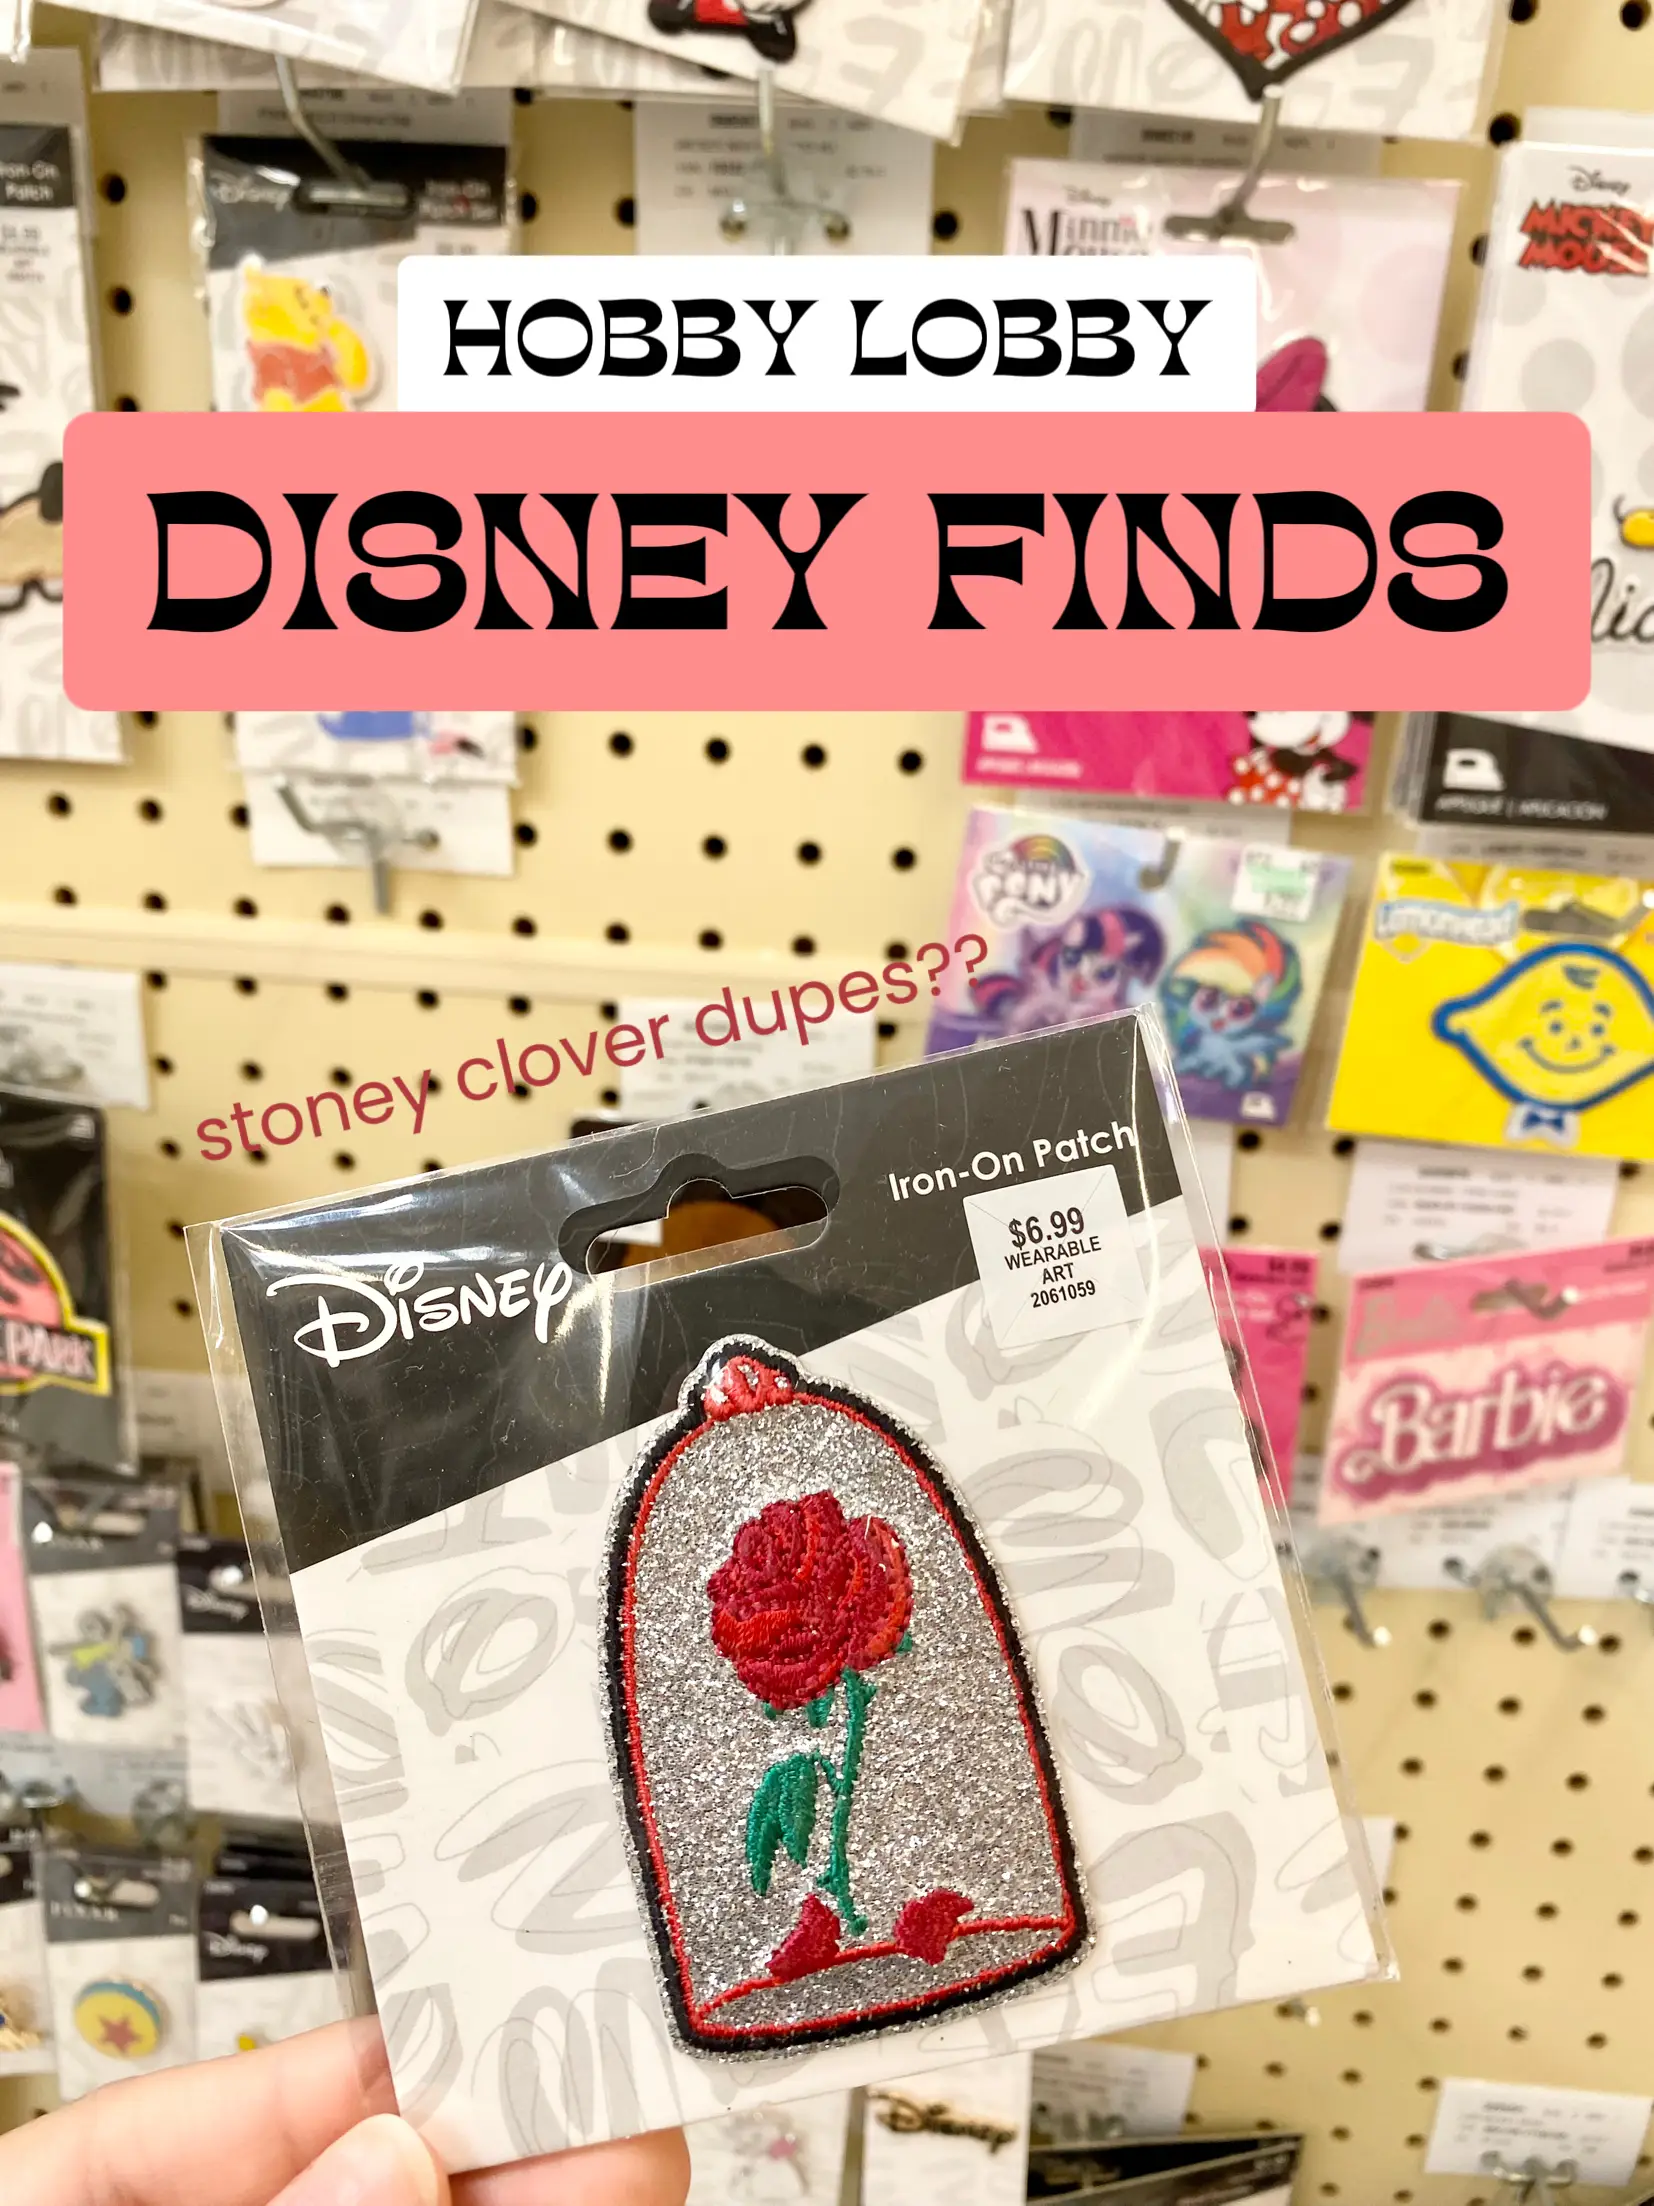 So many Disney patches! What would you iron these on to? #hobbylobby #